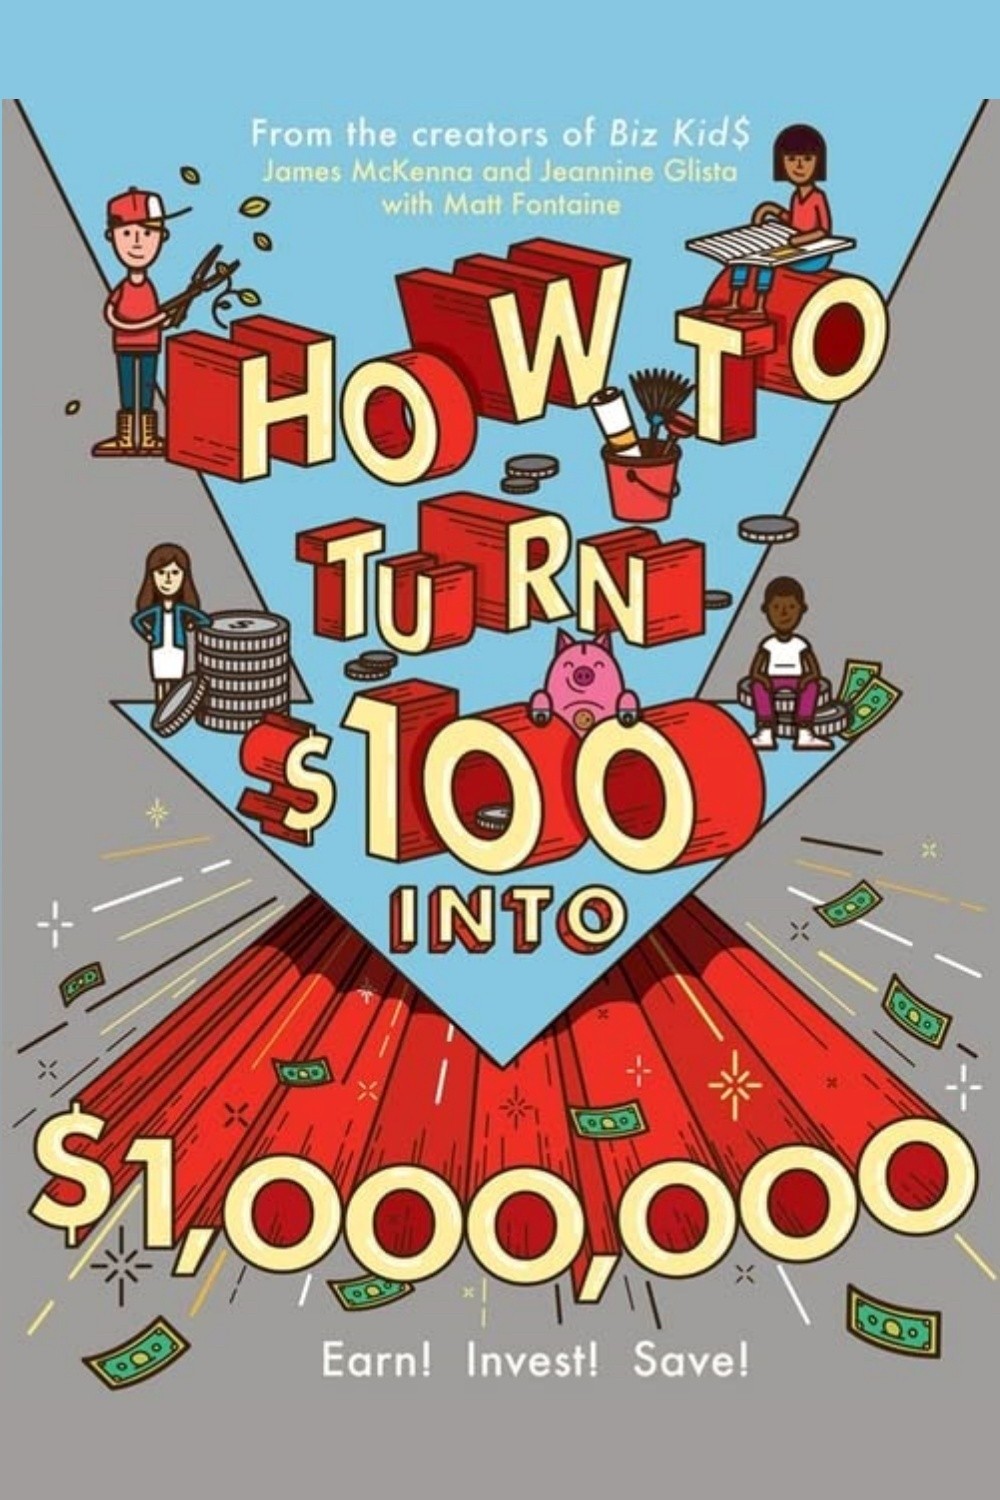 How To Turn $100 Into 1,000,000